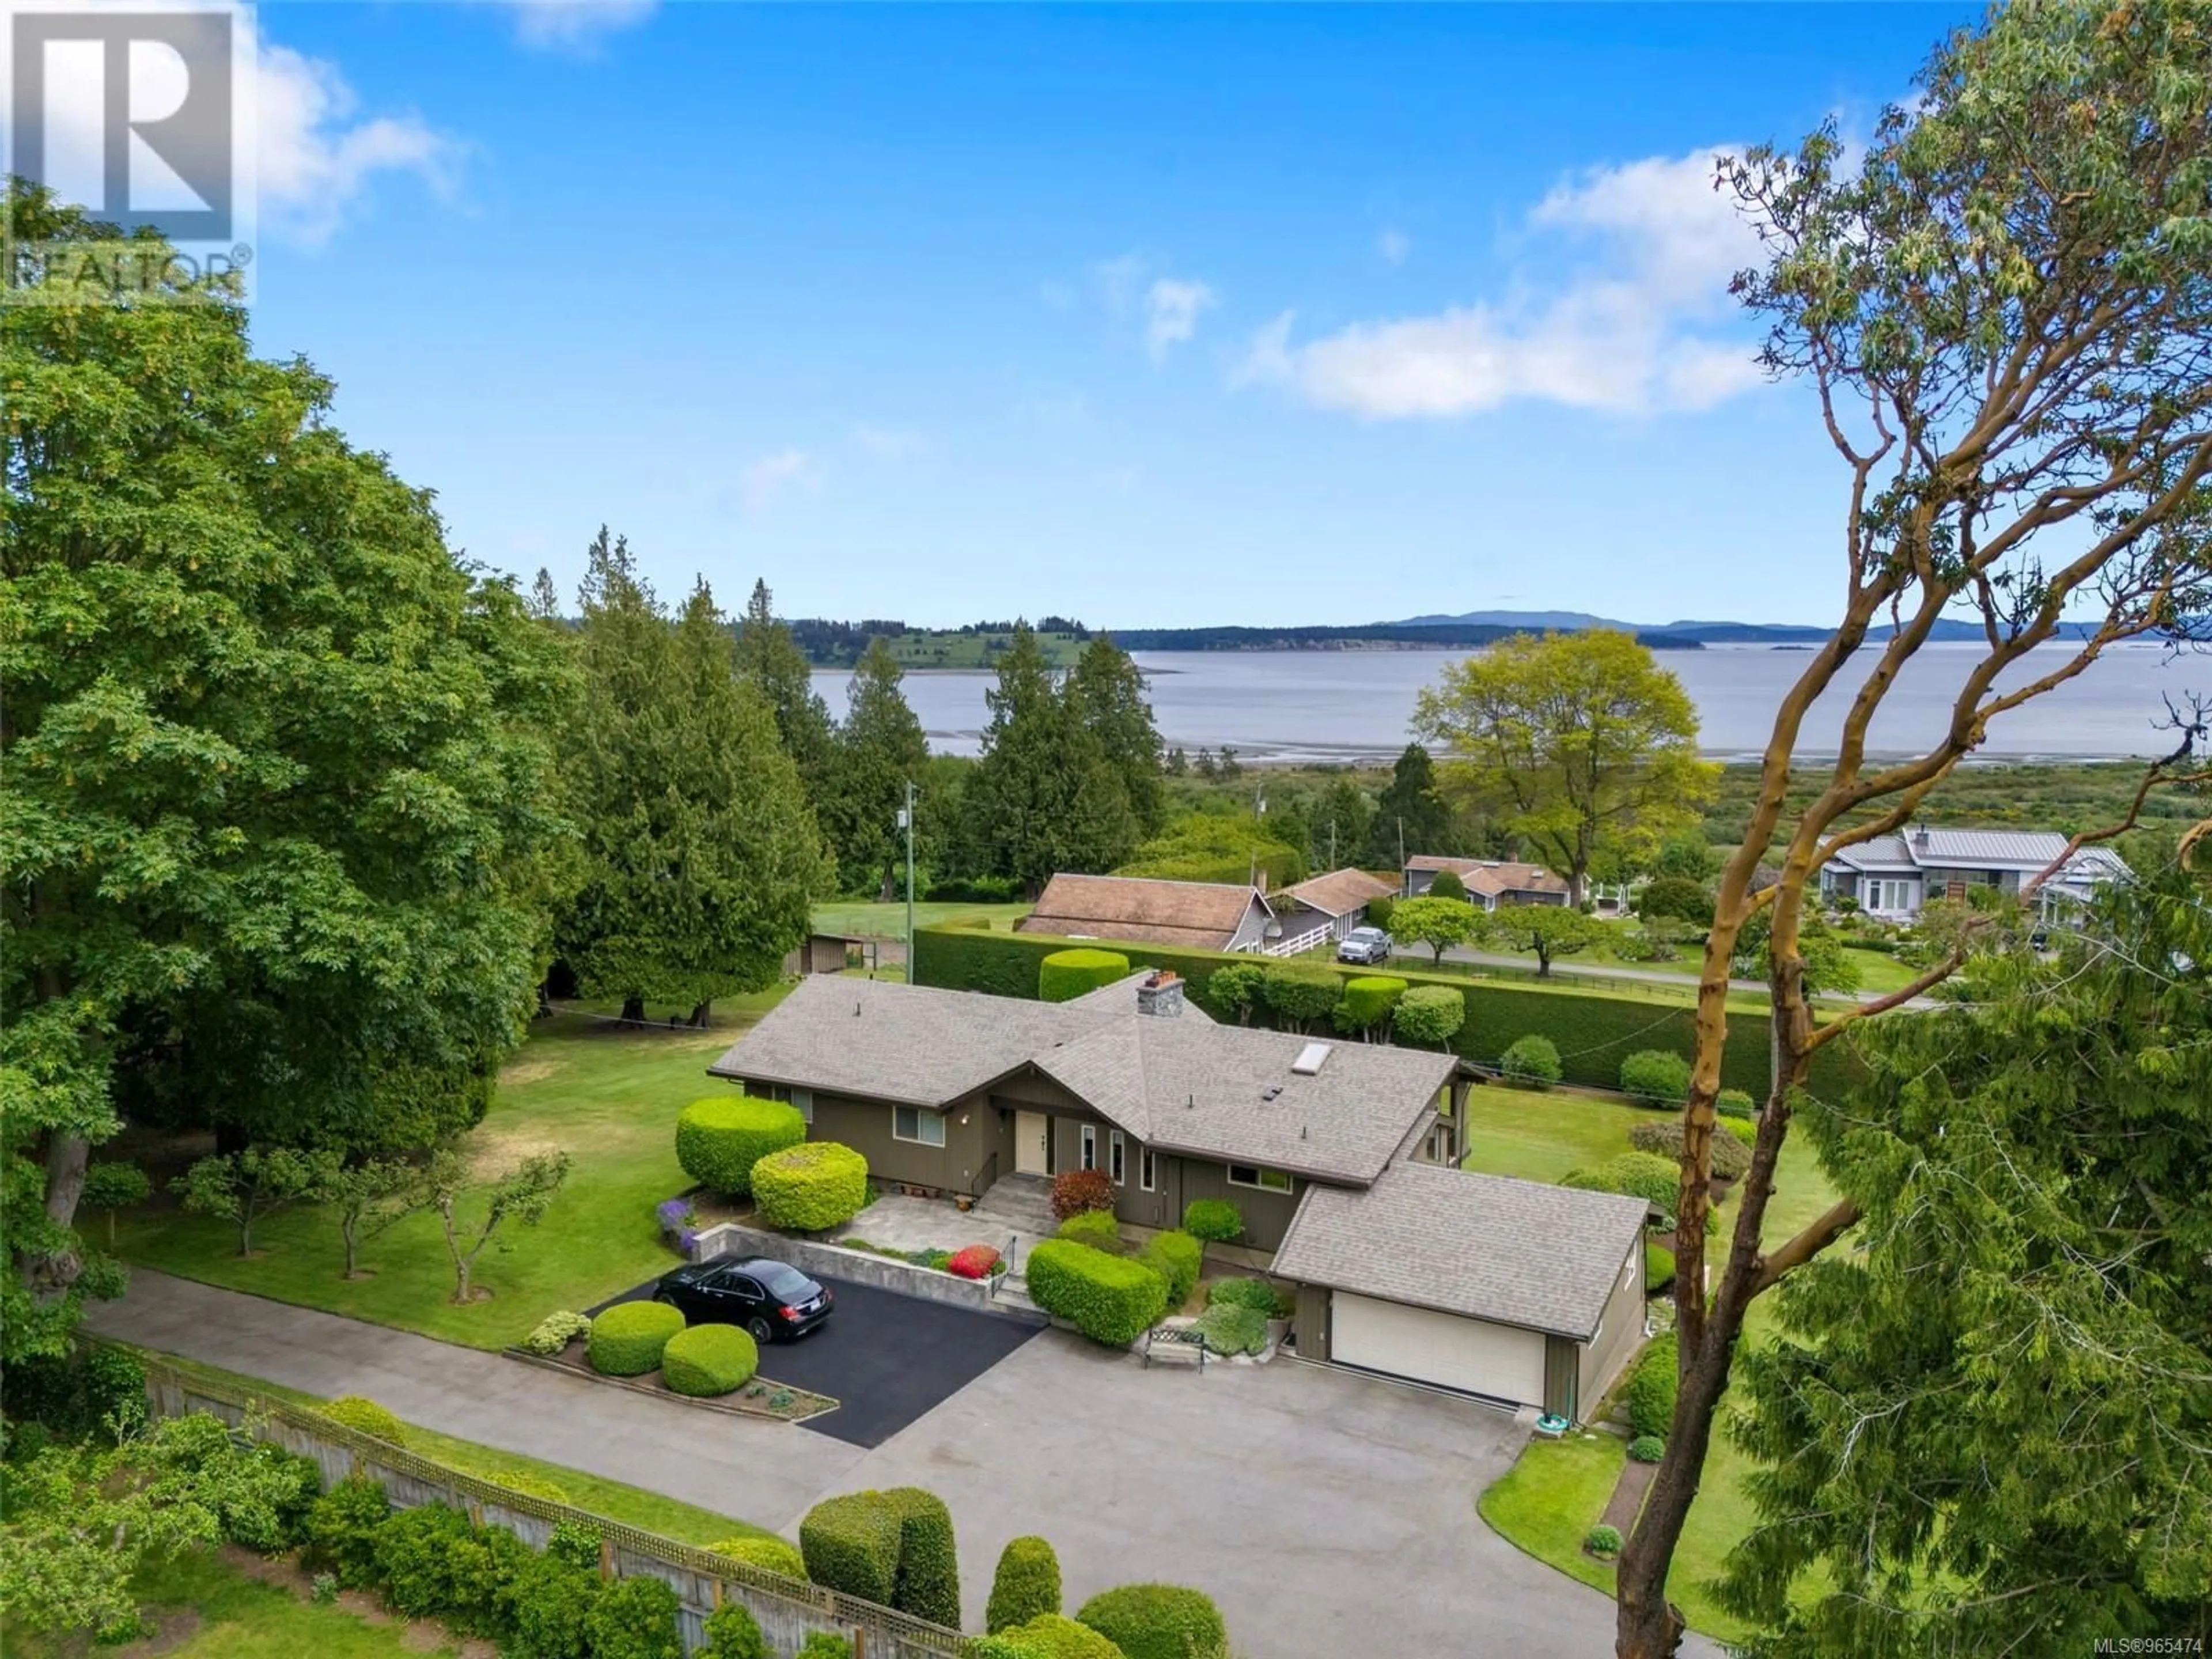 Lakeview for 2938 Lamont Rd, Central Saanich British Columbia V8M1W5